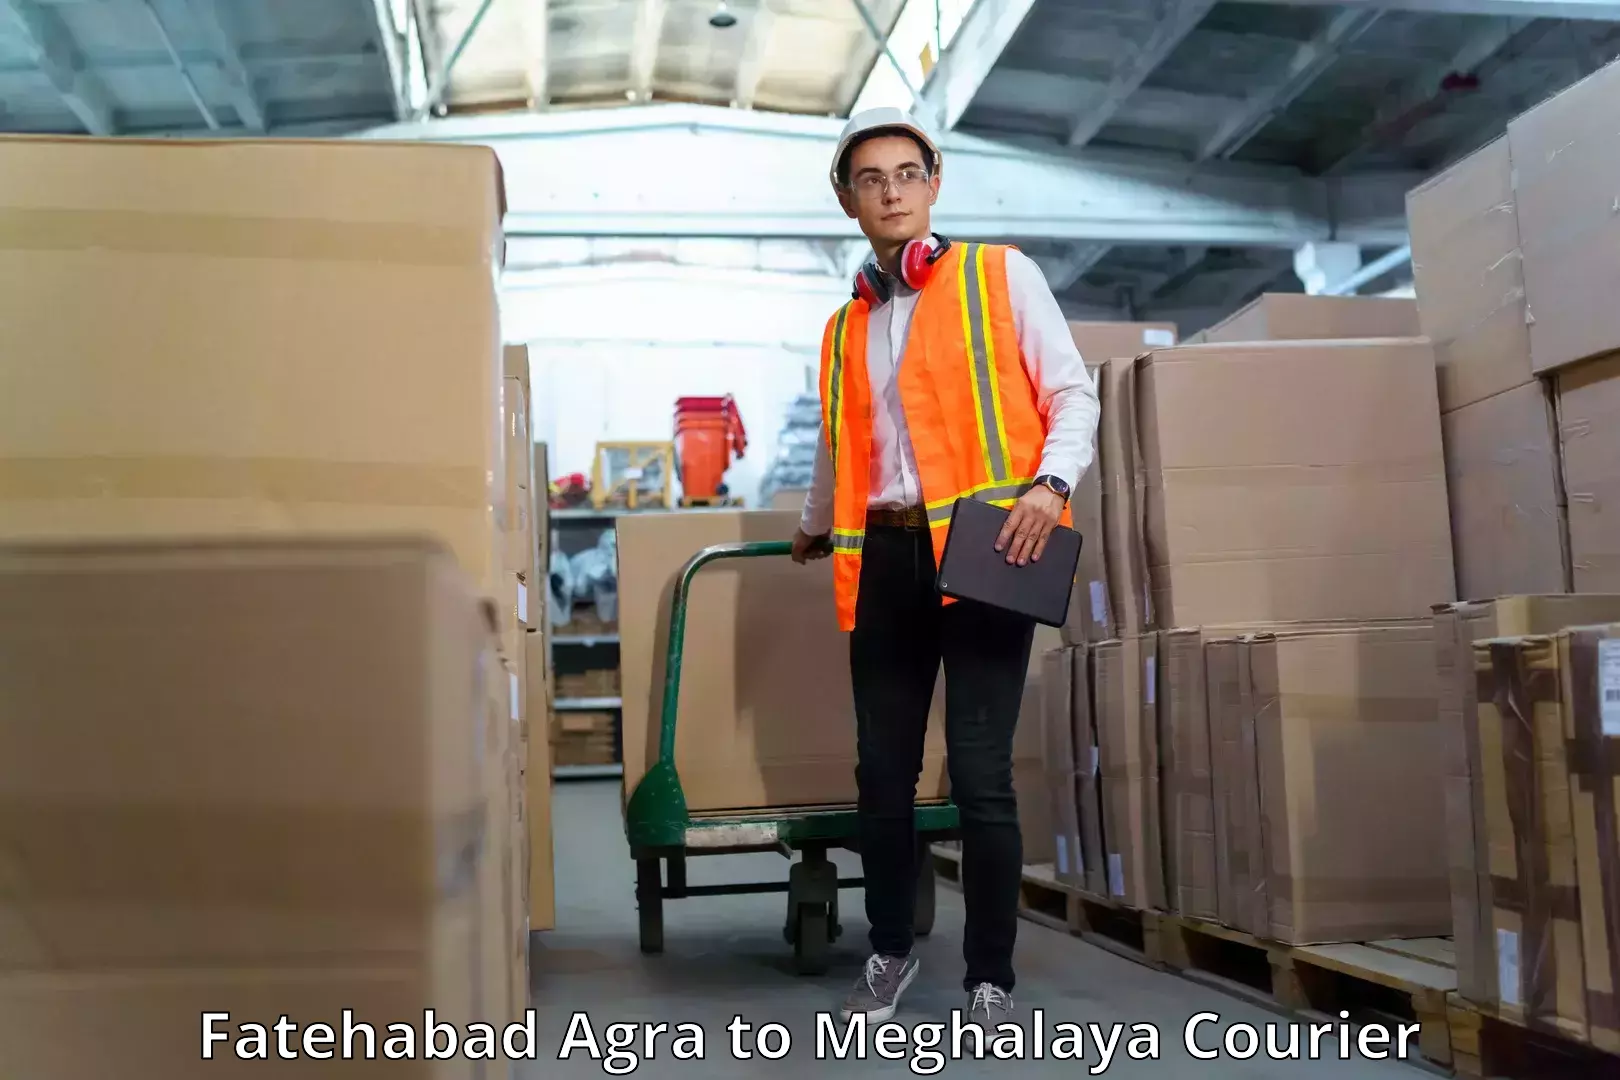 Cargo courier service Fatehabad Agra to Meghalaya